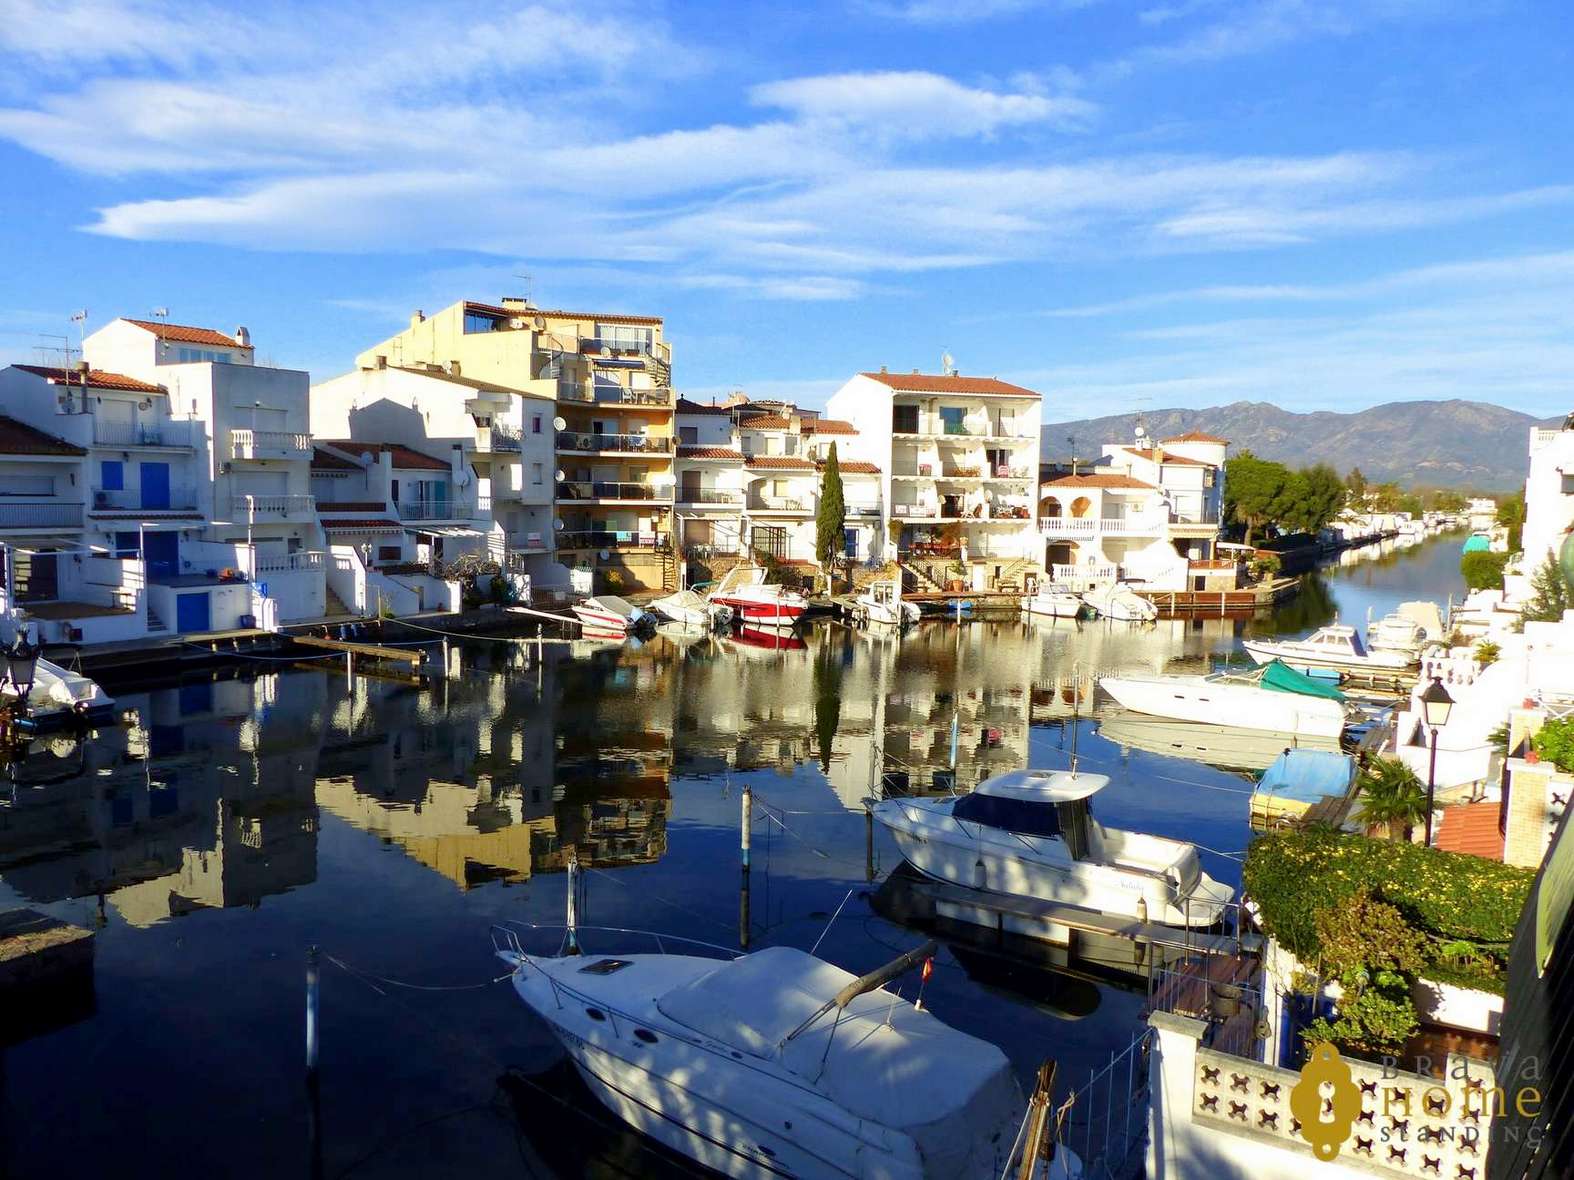 Beautiful apartment overlooking the canal, for sale in Empuriabrava.